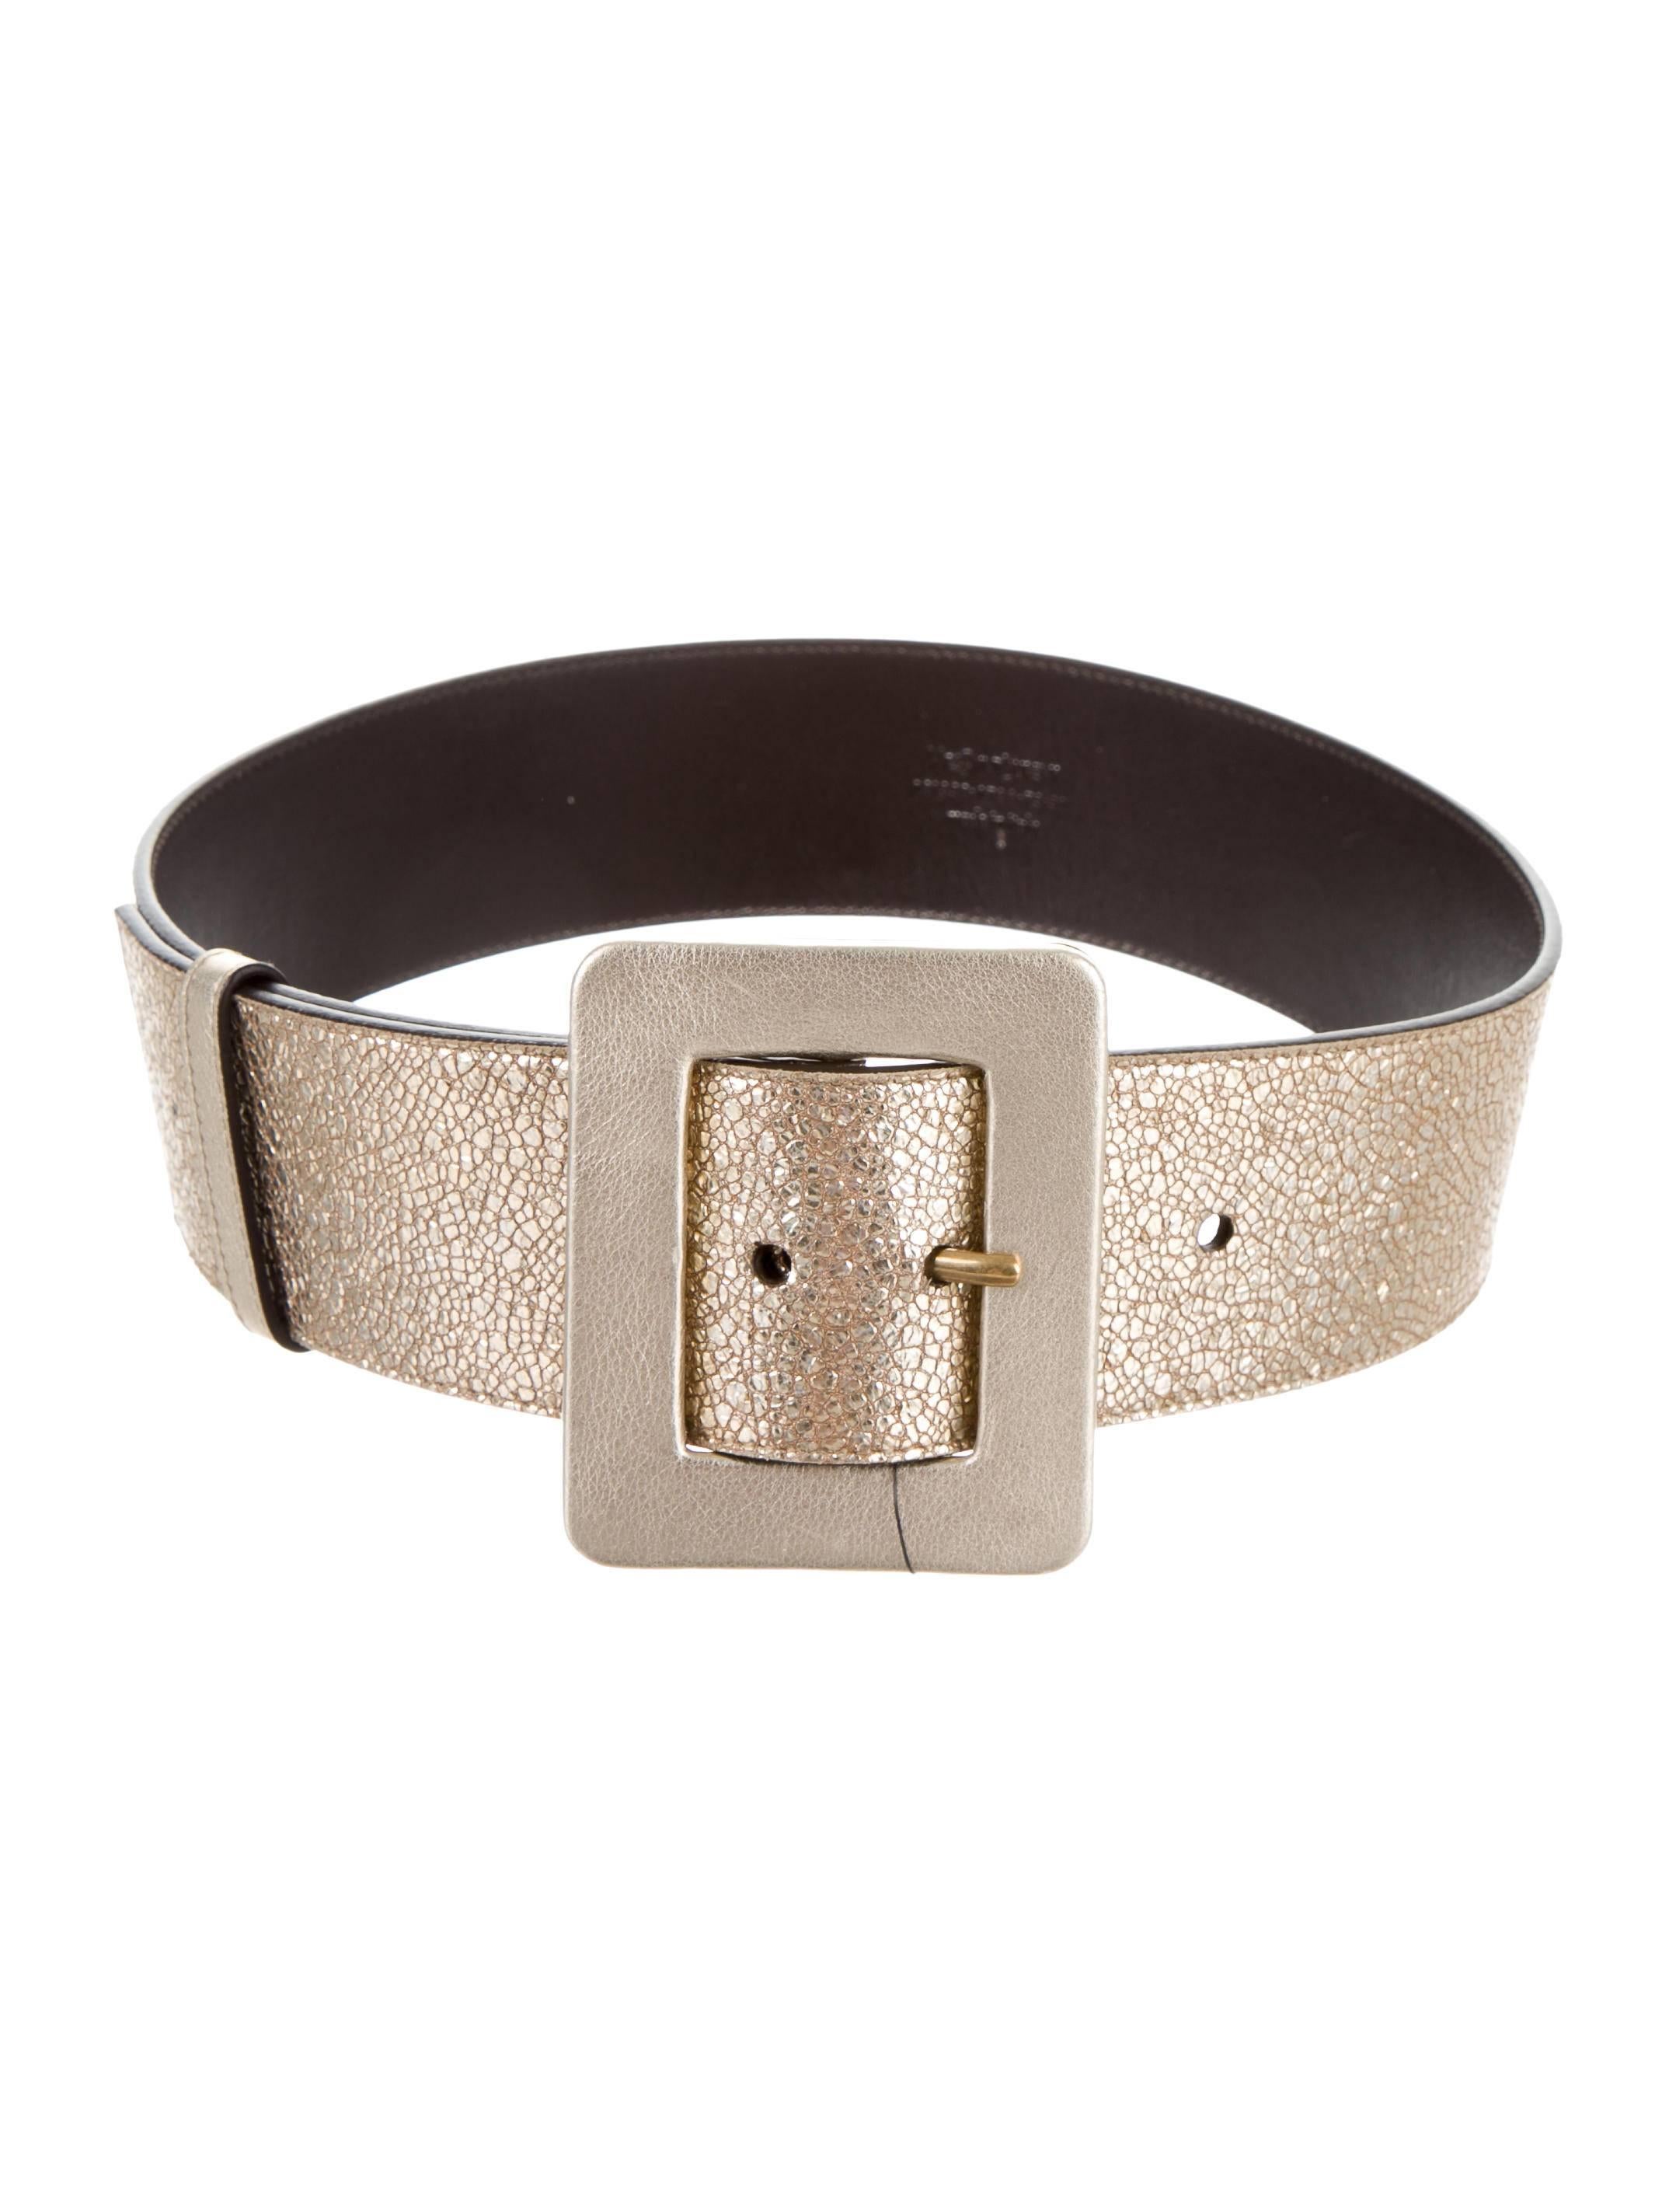 CURATOR'S NOTES

Size listed Medium
Leather
Gold tone hardware
Peg-in-hole buckle closure
Width 2.5